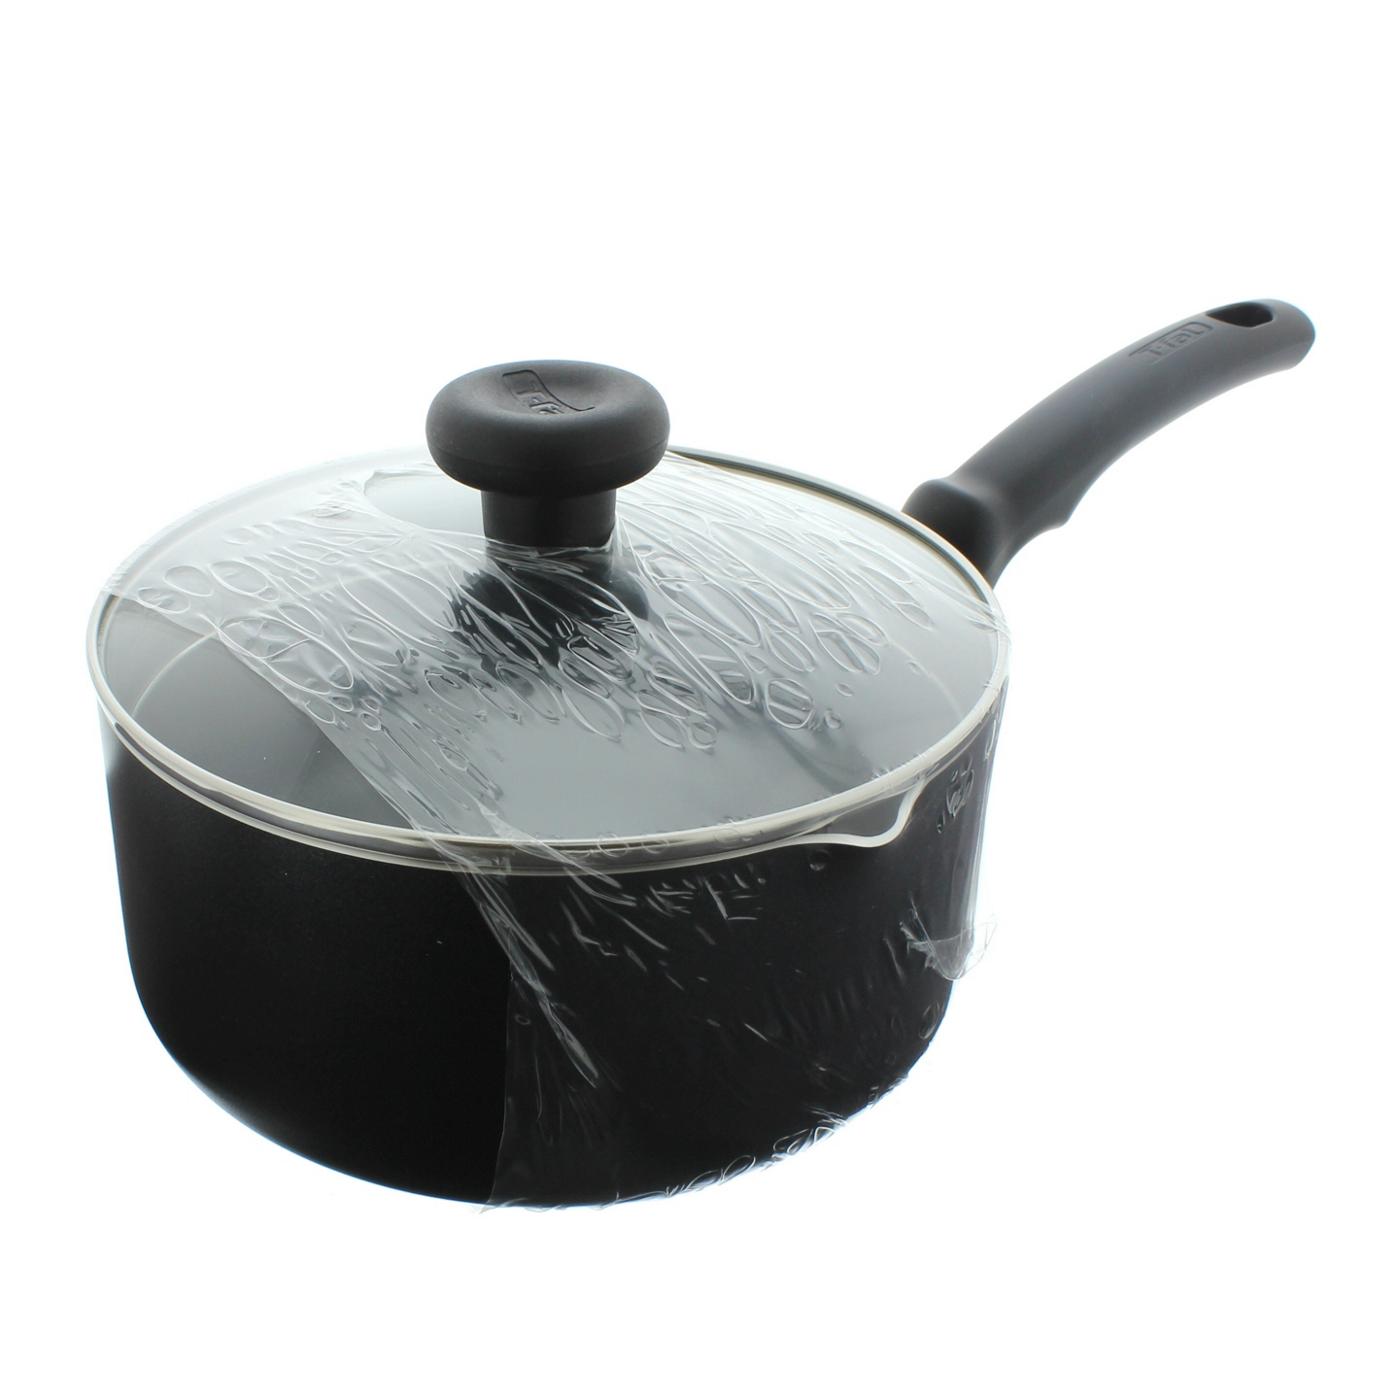 T-fal Soft Handle Black Sauce Pan with Lid; image 1 of 2